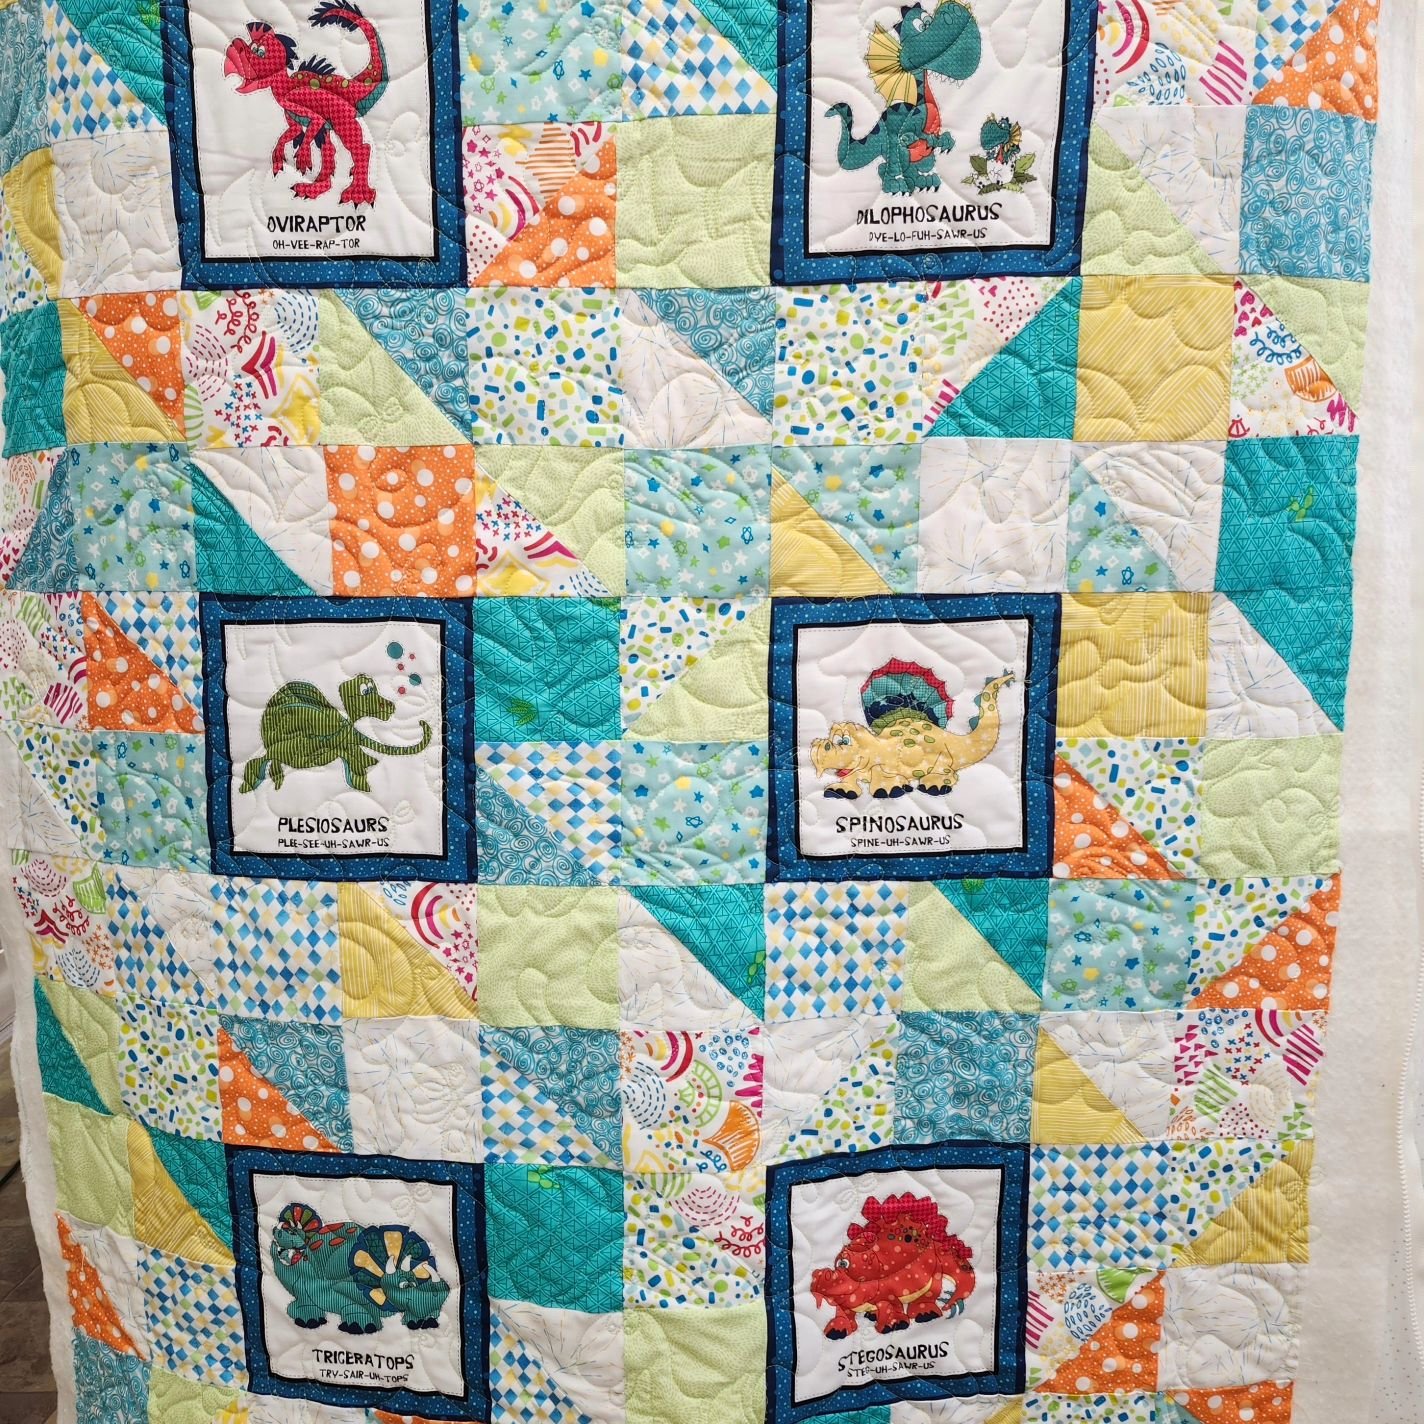 Debbie was in today to longarm both of these cute baby quilts.  The first is quilted with a pattern called 'dinosaurs'. The second is quilted with a pattern called 'circle meander' ##longarmmachinerentals ##quiltfun ##quiltyourselfawesome ##quilting 